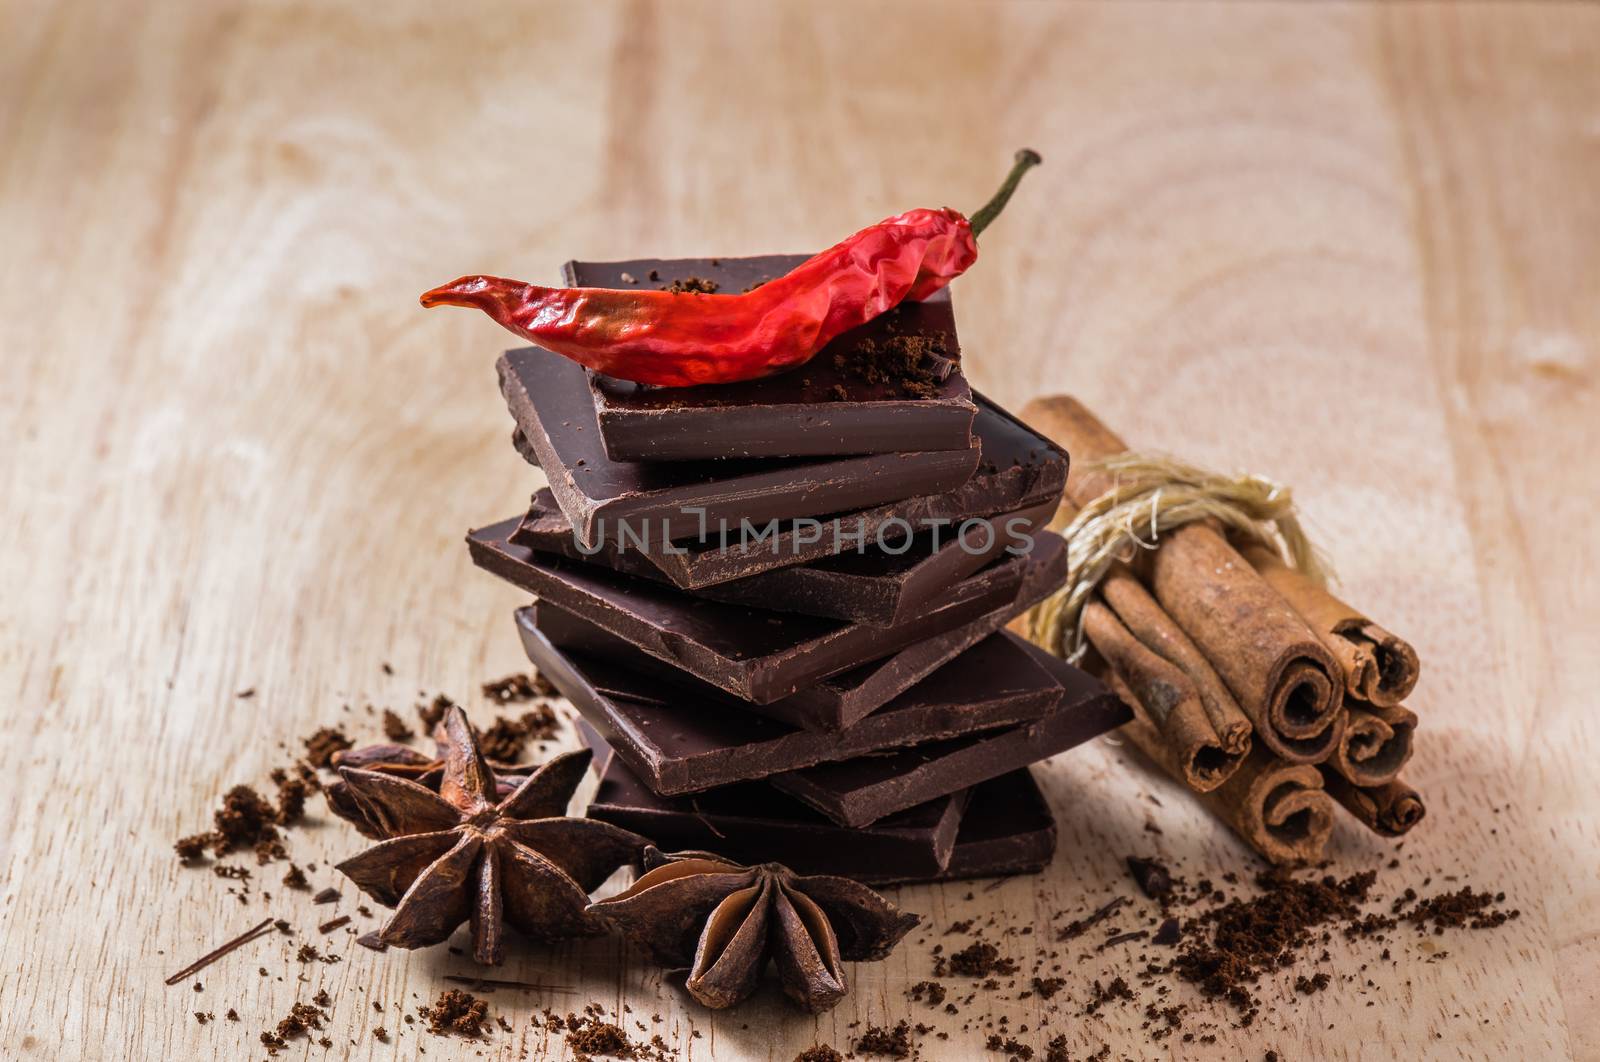 Chocolate with Different Spices by Seva_blsv